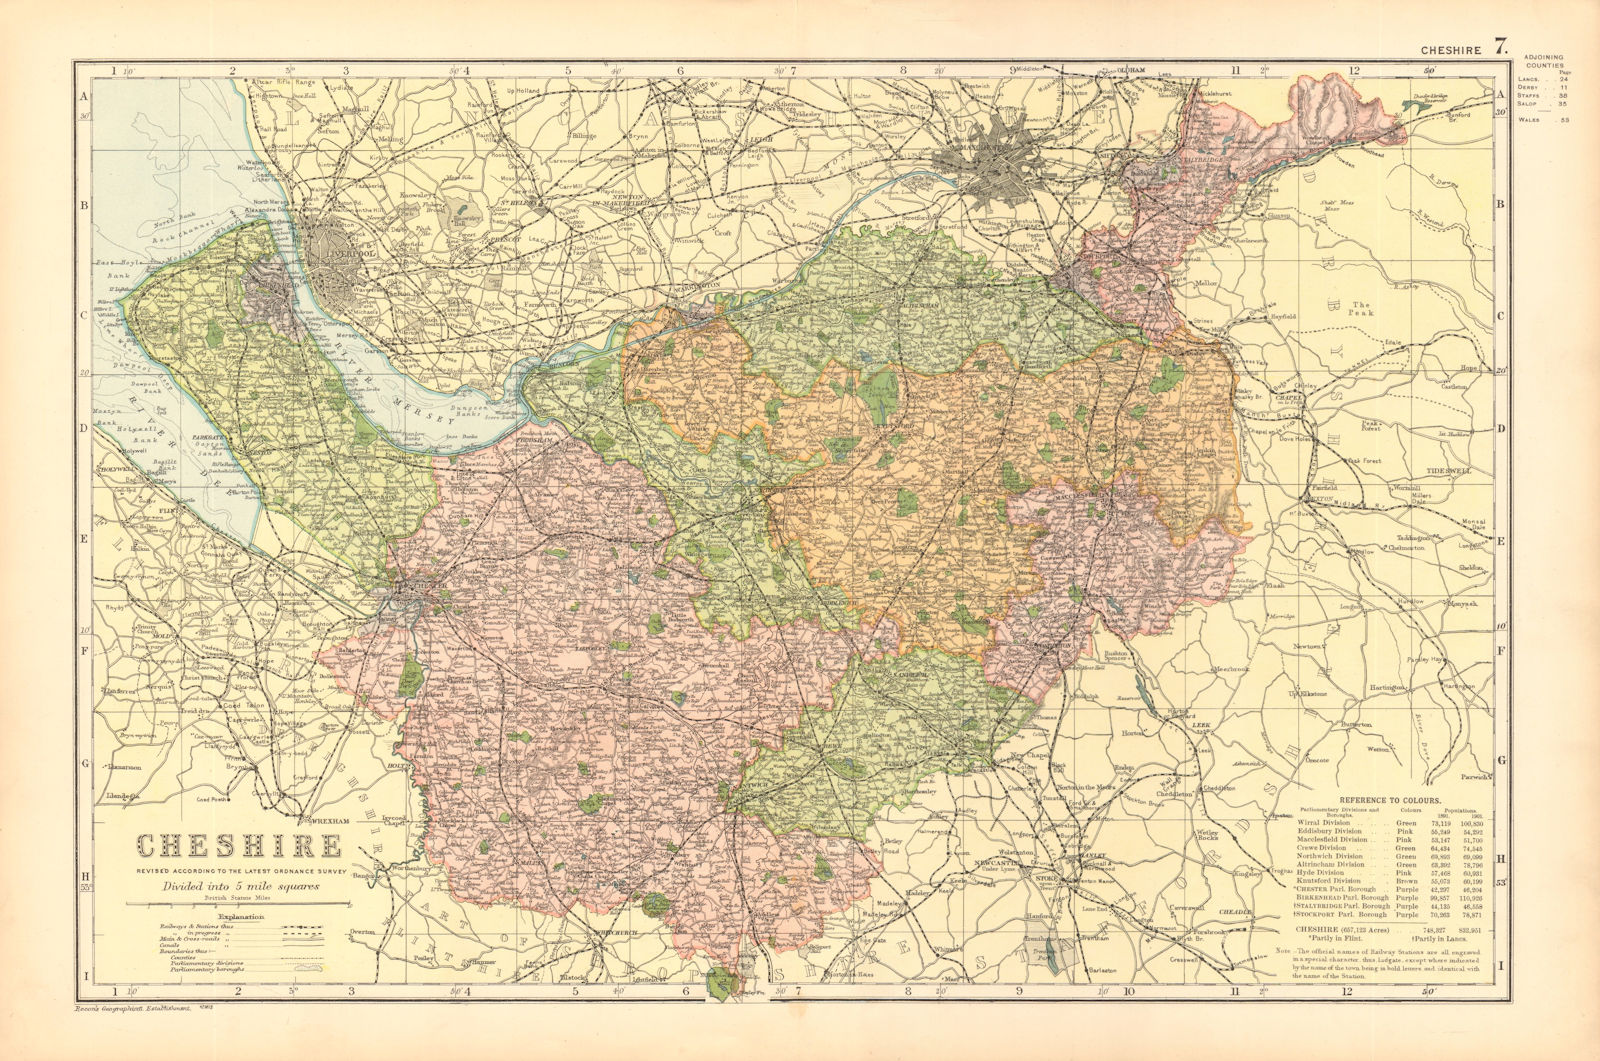 CHESHIRE. Showing Parliamentary divisions, boroughs & parks. BACON 1904 map